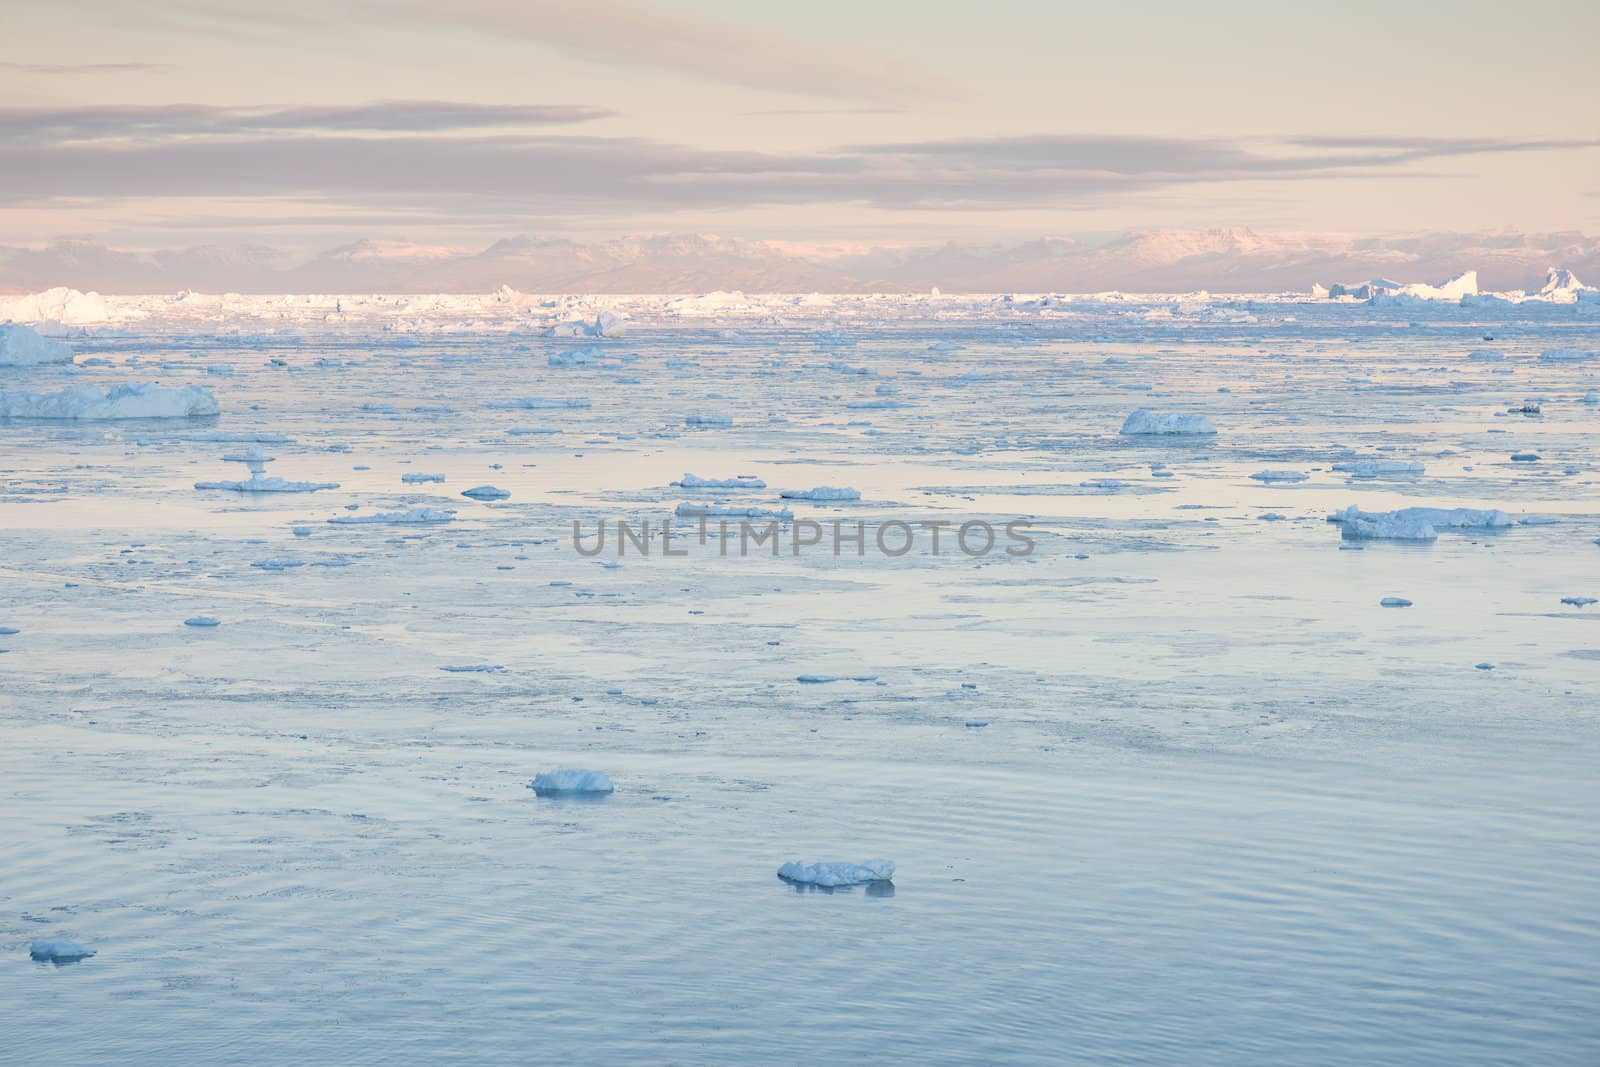 Arctic landscape in Greenland around Ilulissat with mountains and icebergs